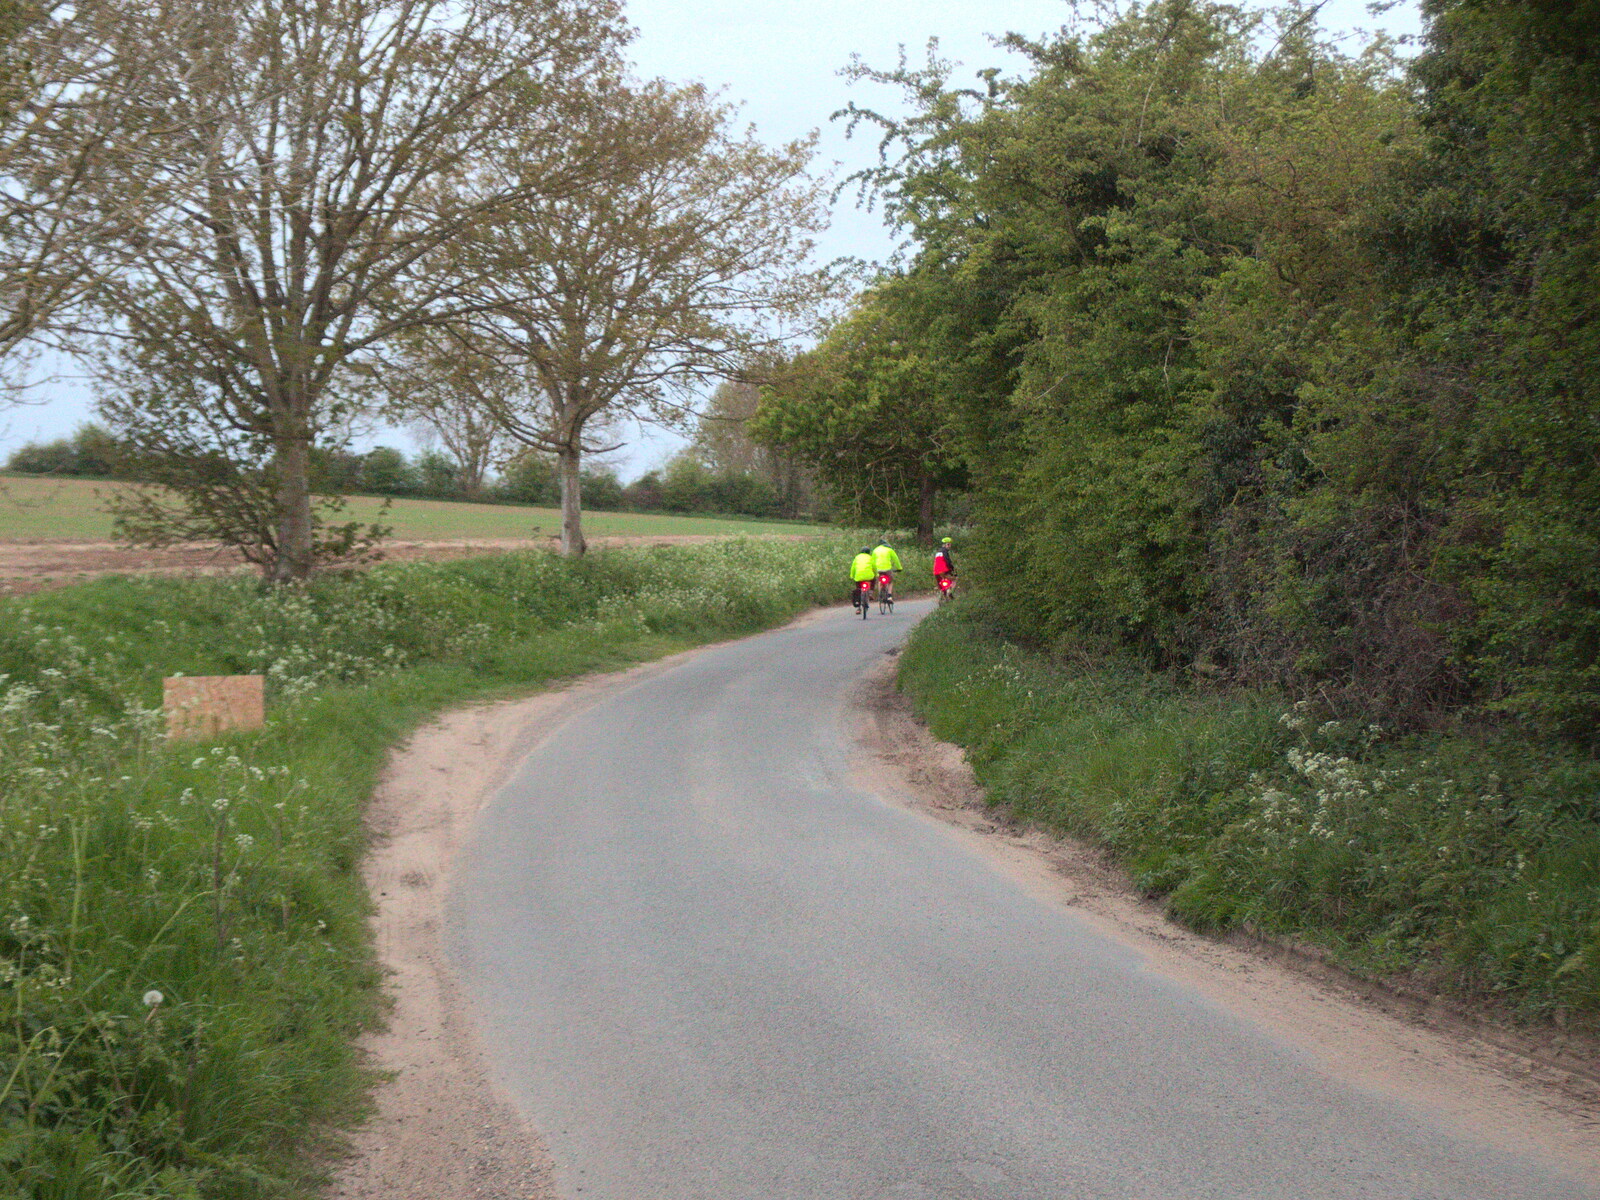 The BSCC heads off to Hoxne from The BSCC at the King's Head, Brockdish, Norfolk - 13th May 2021